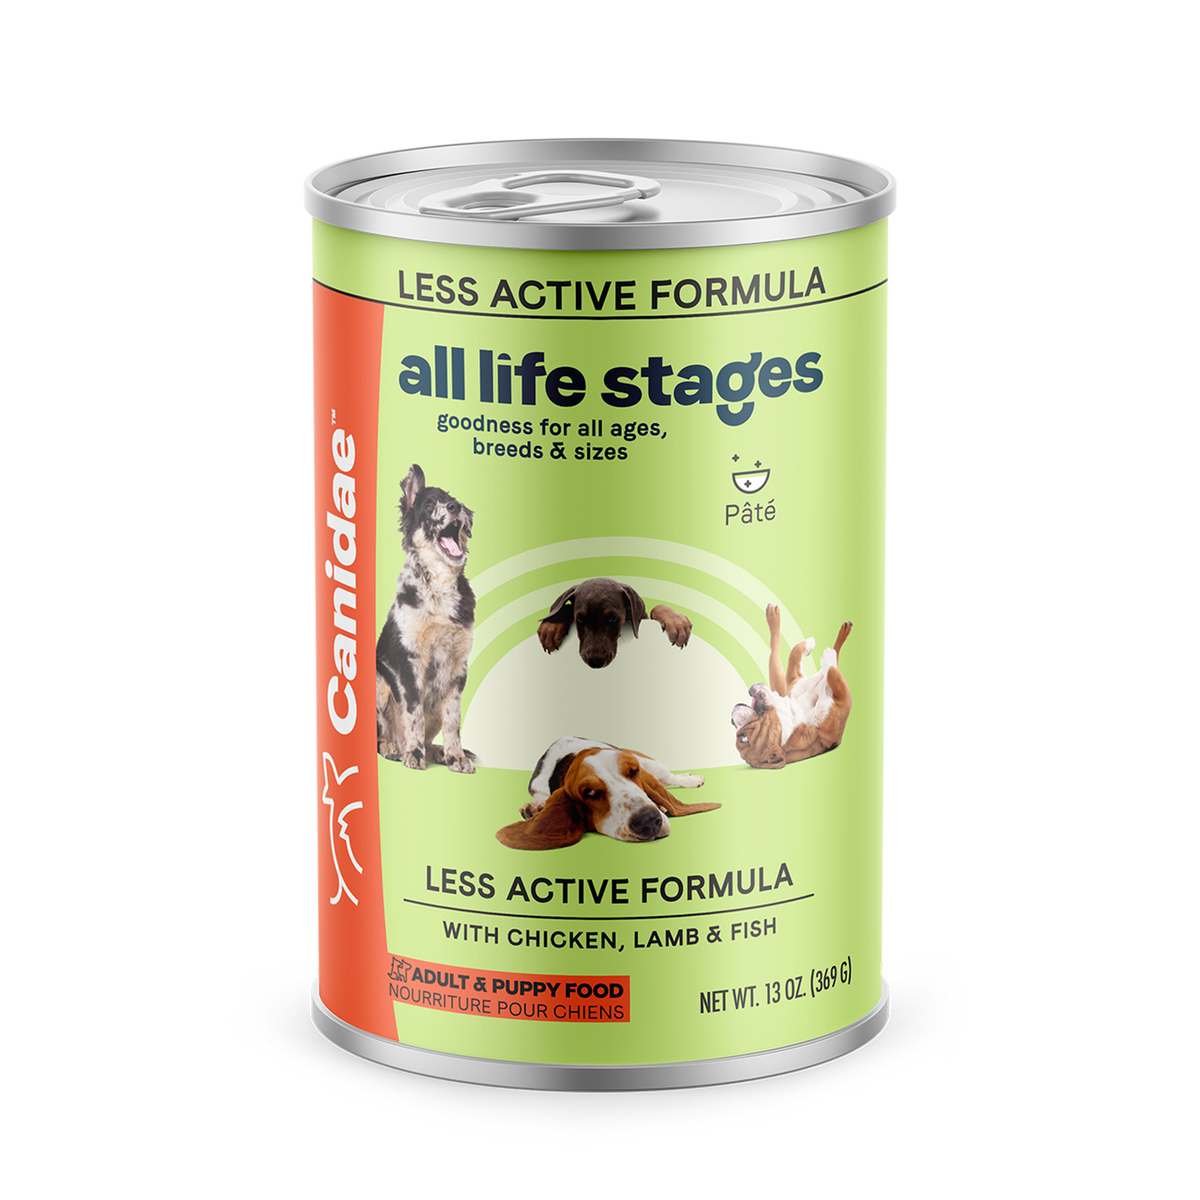 Canidae - All Dog Breeds, All Life Stages Platinum Formula Canned Dog Food